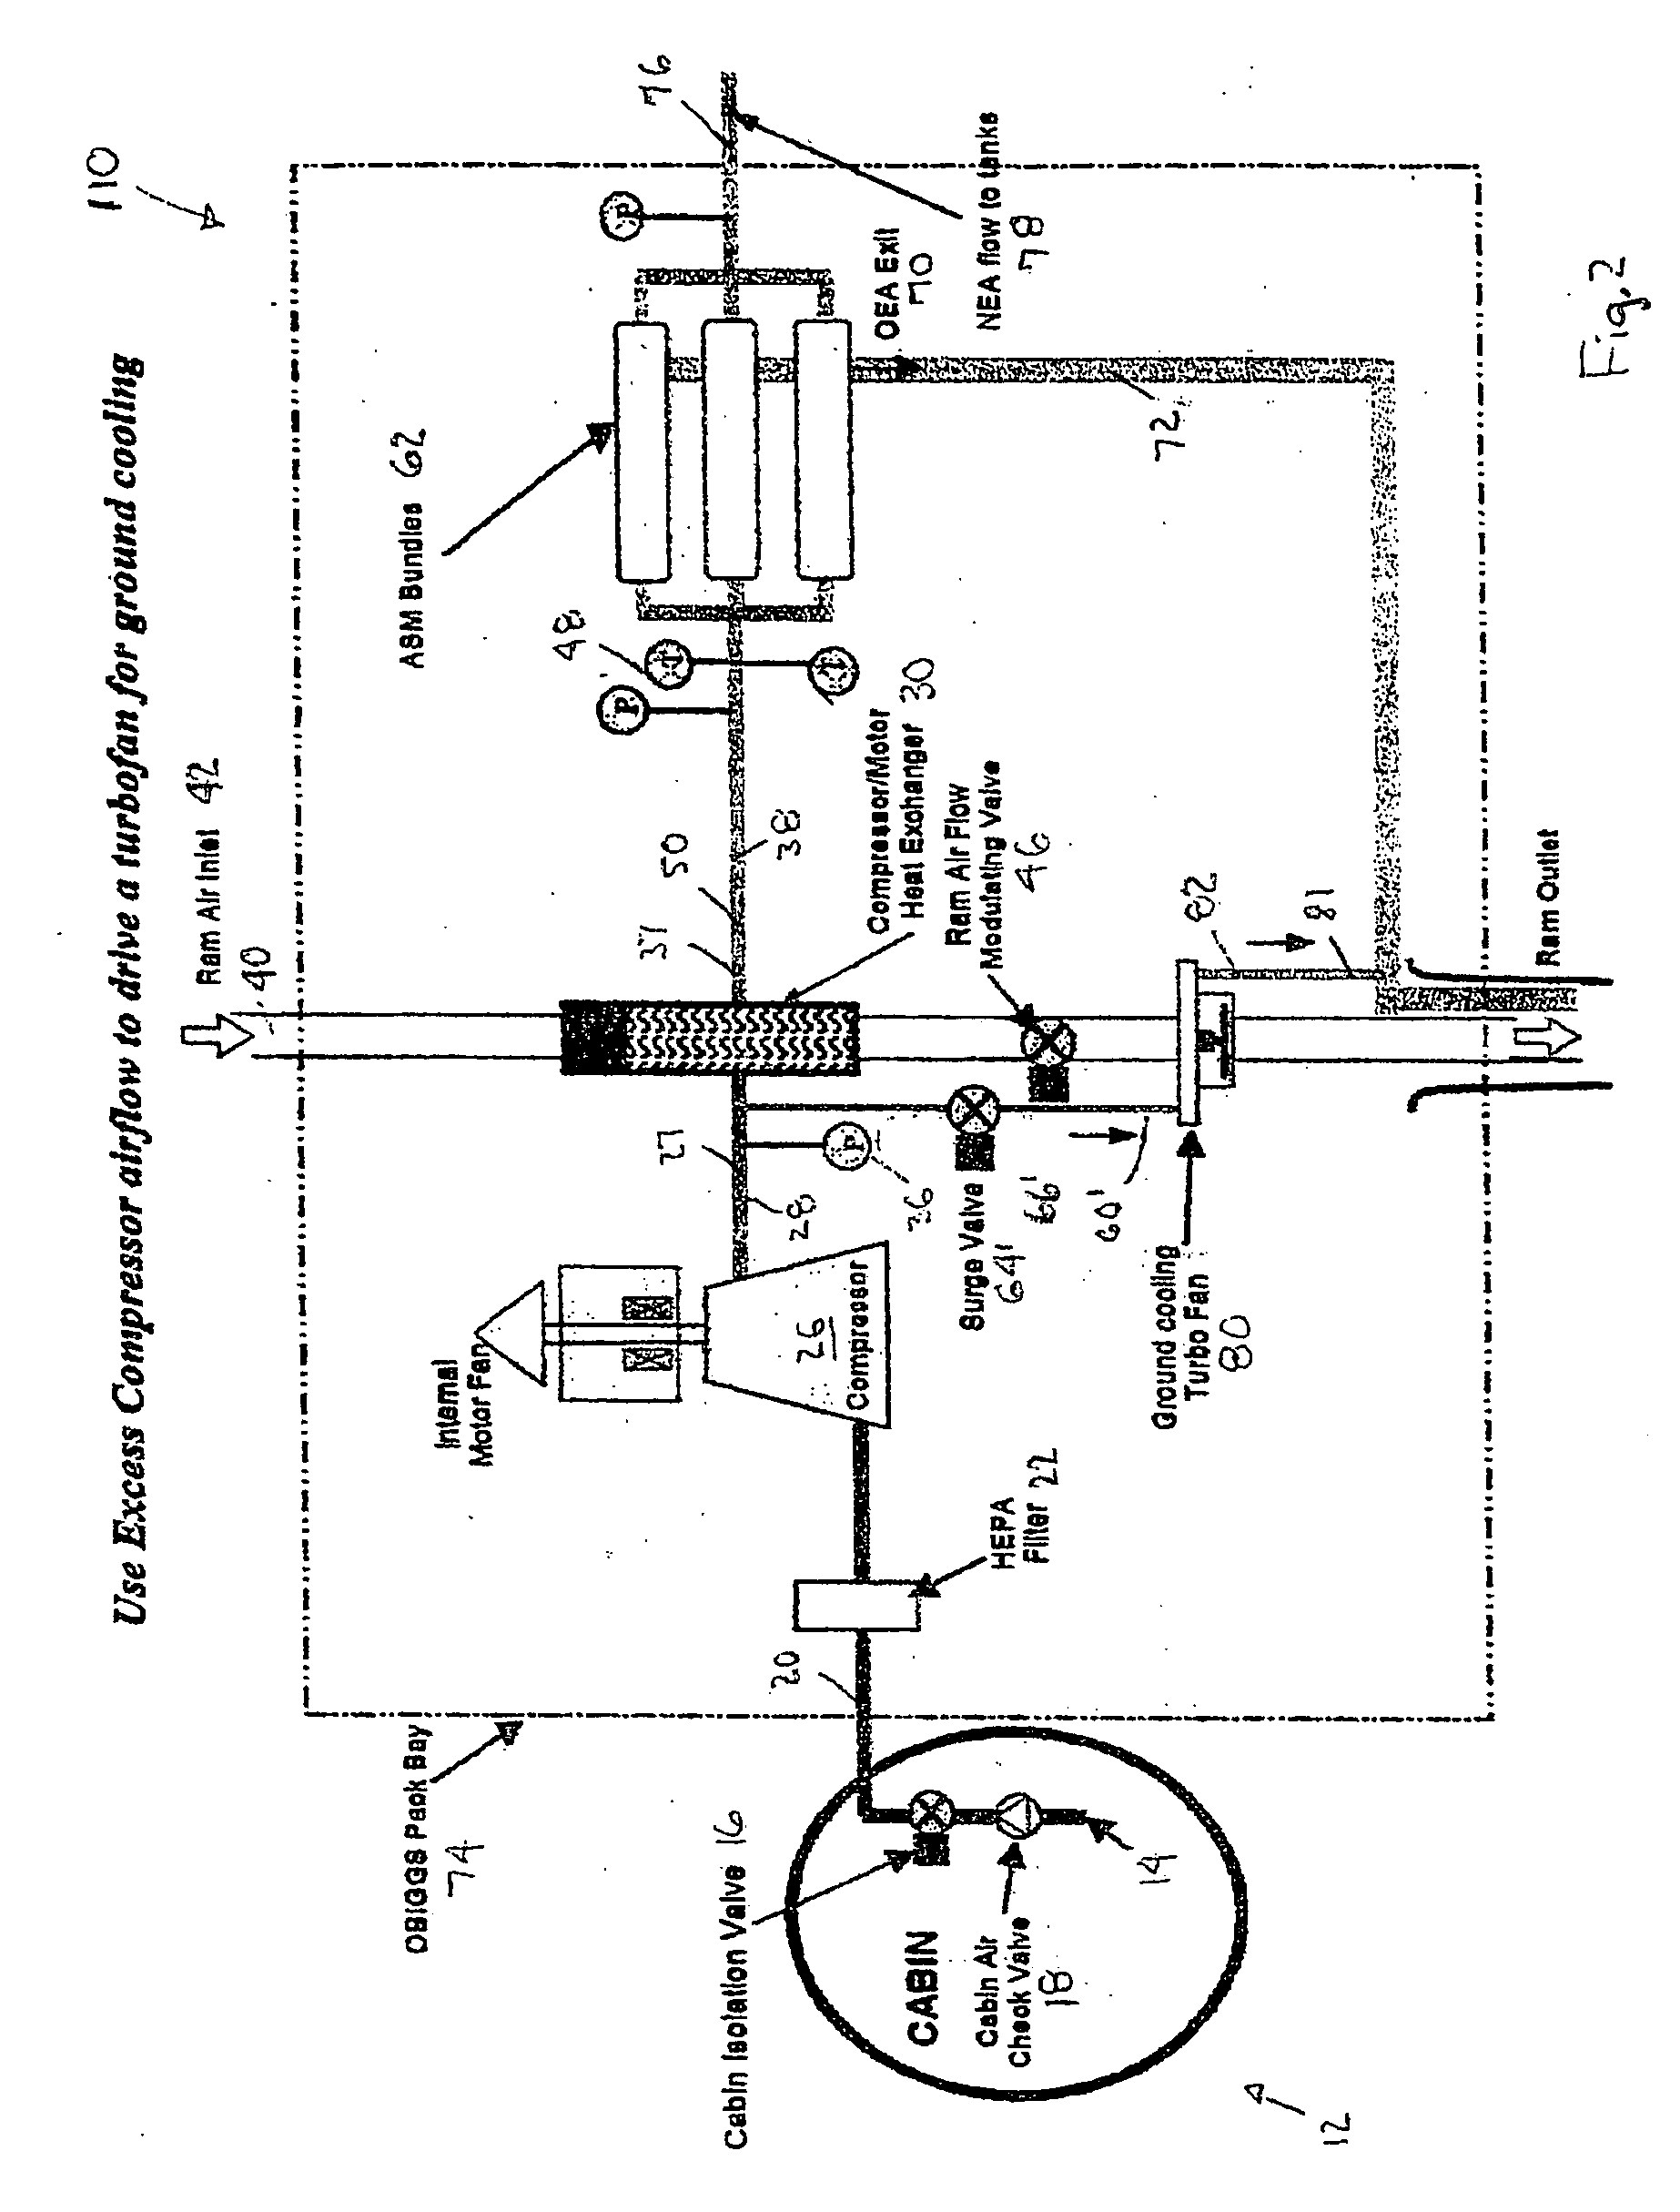 Utilization of compressor surge control air in an aircraft on-board inert gas generating system